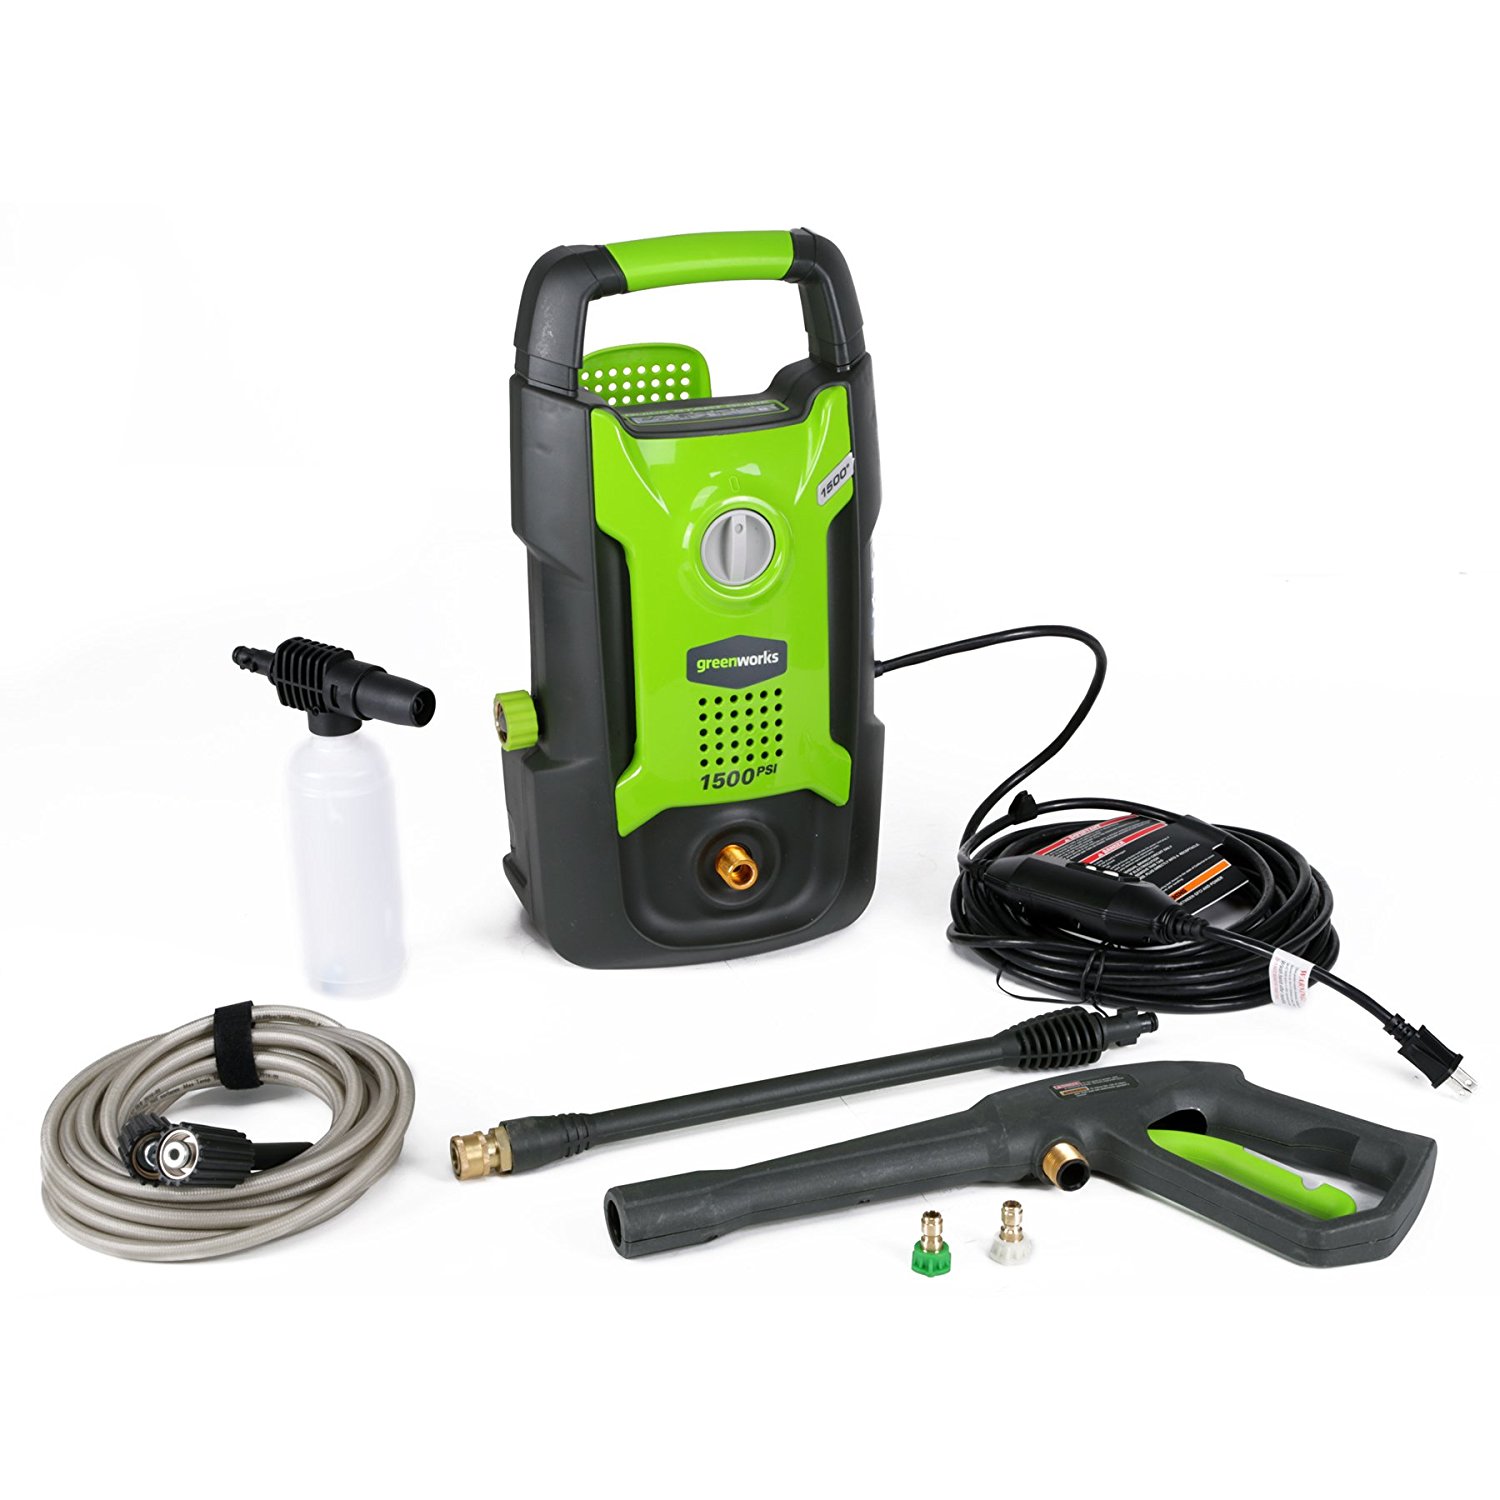 Today only: Greenworks 1500 PSI 13-amp 1.2 GPM pressure washer for $58